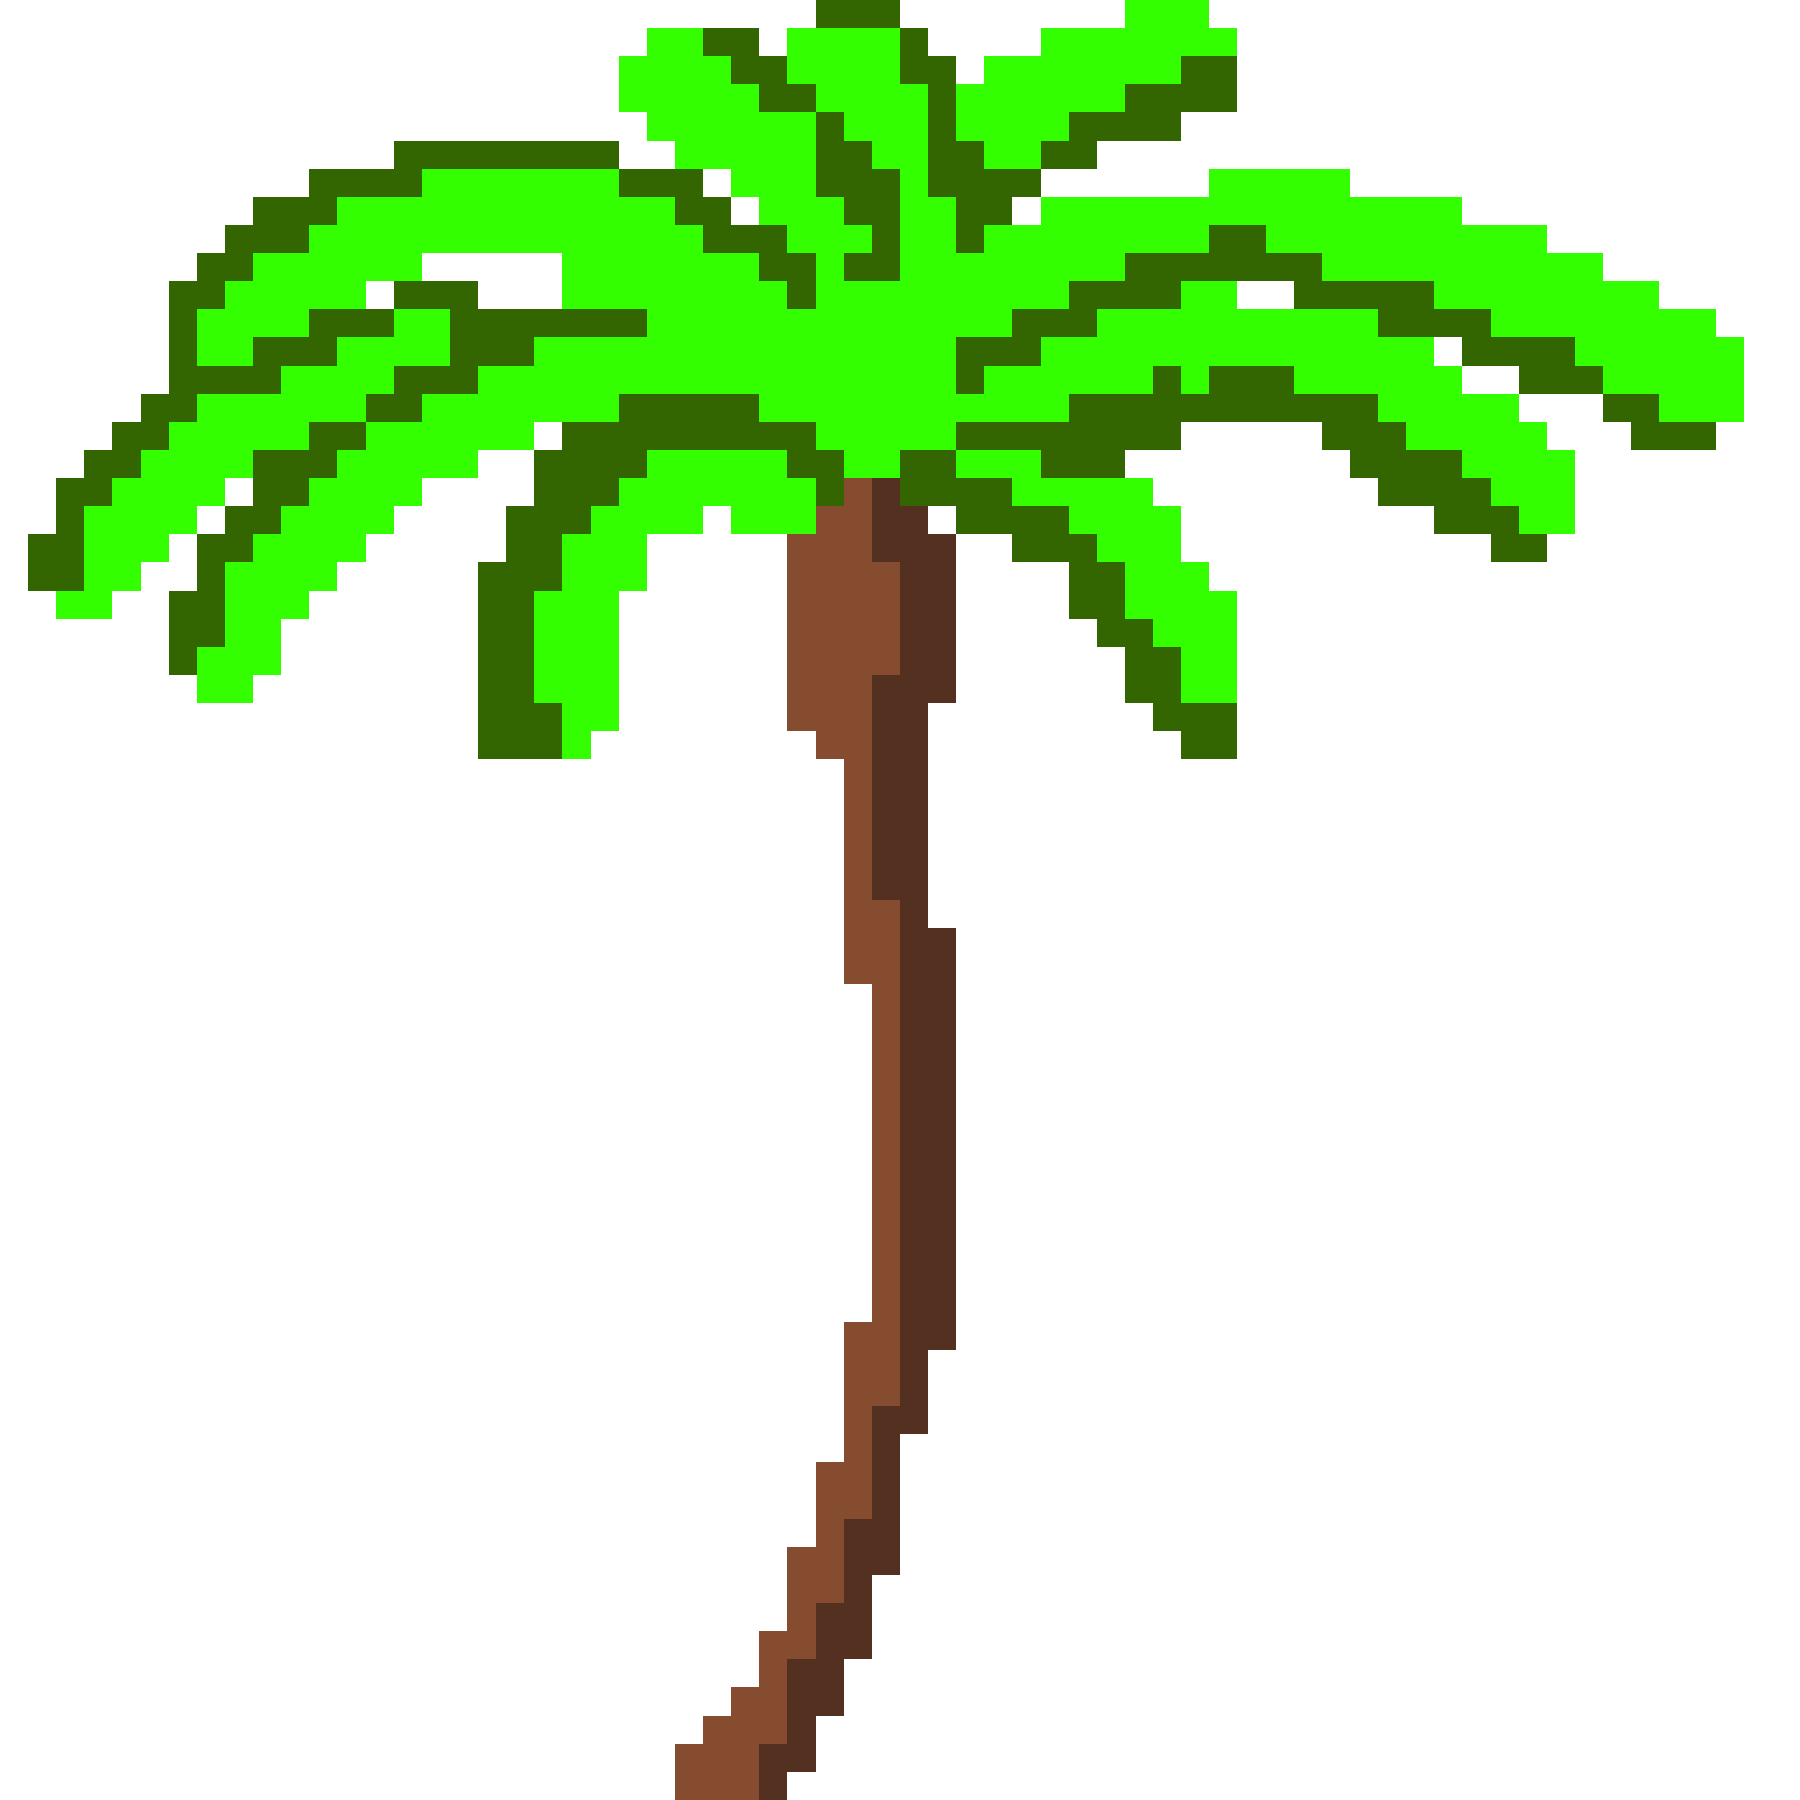 A gif of a suspiciously shaking palm tree.